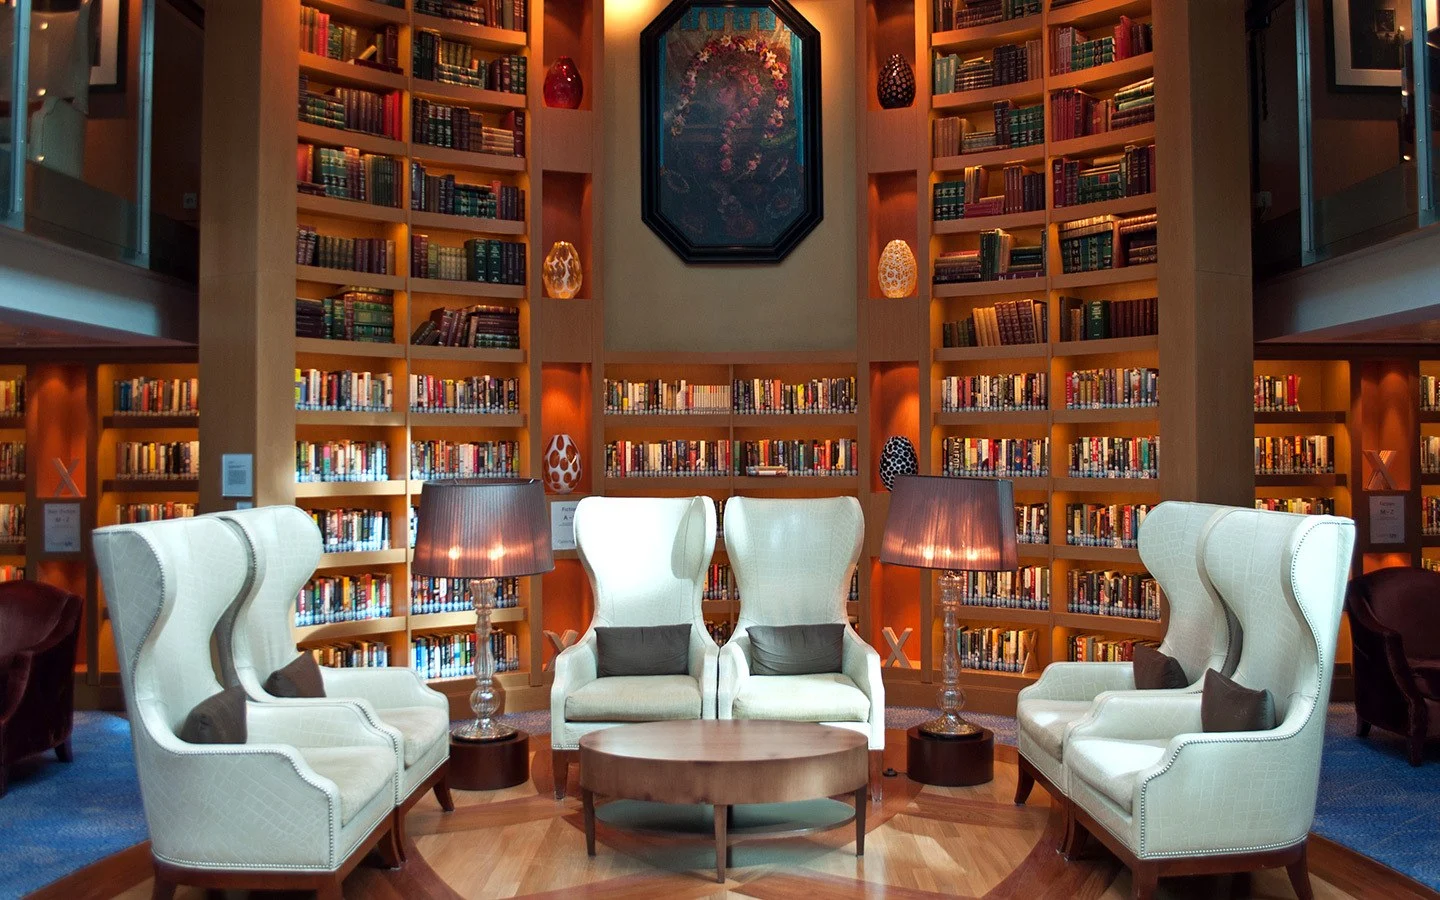 The Celebrity Equinox cruise ship library